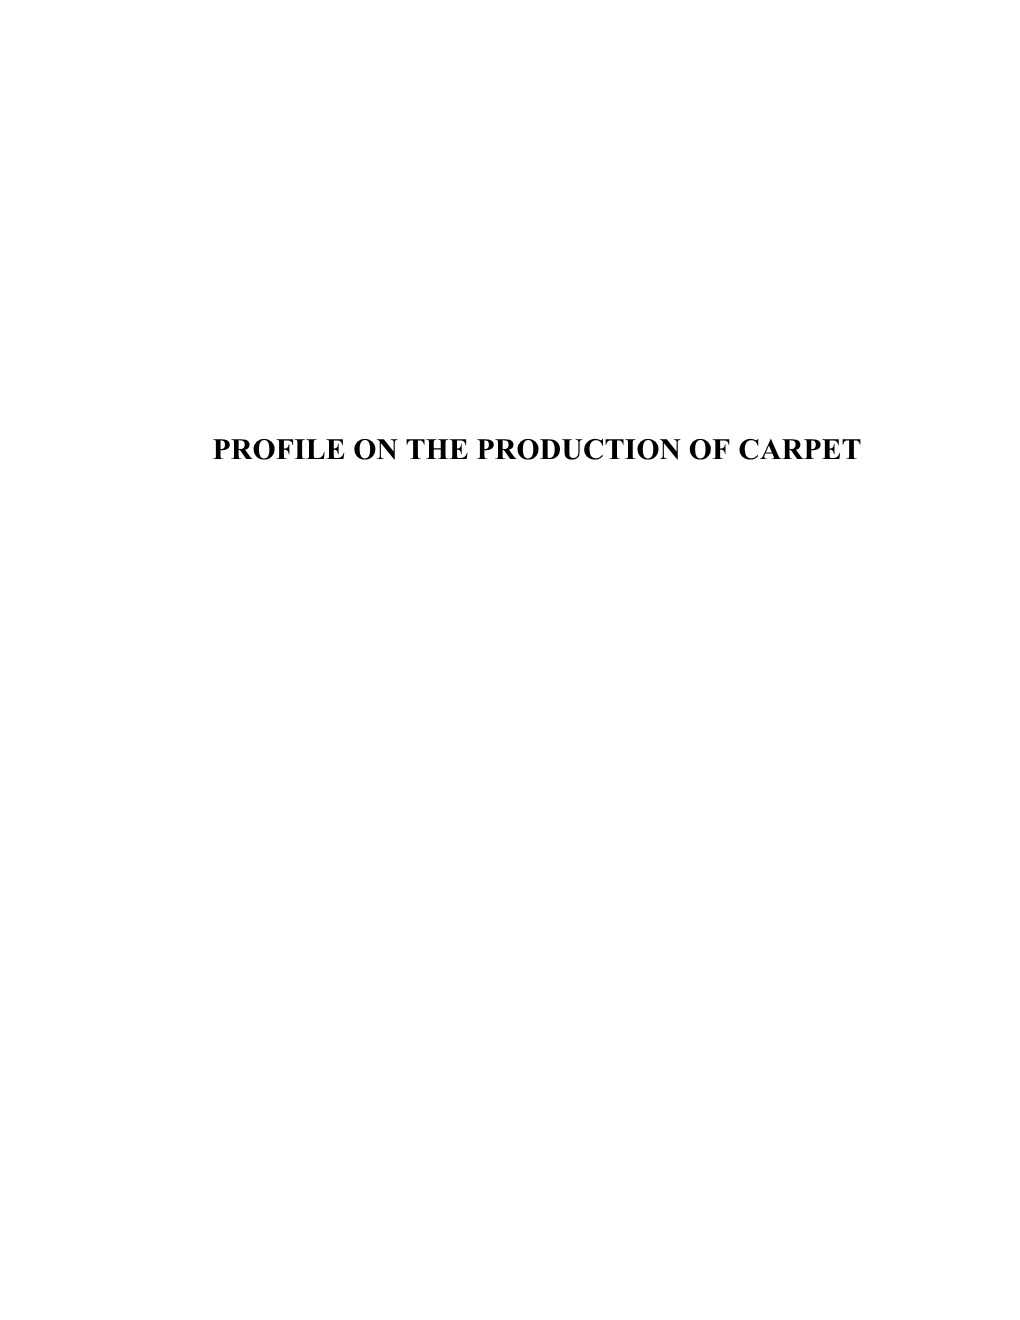 Profile on the Production of Carpet